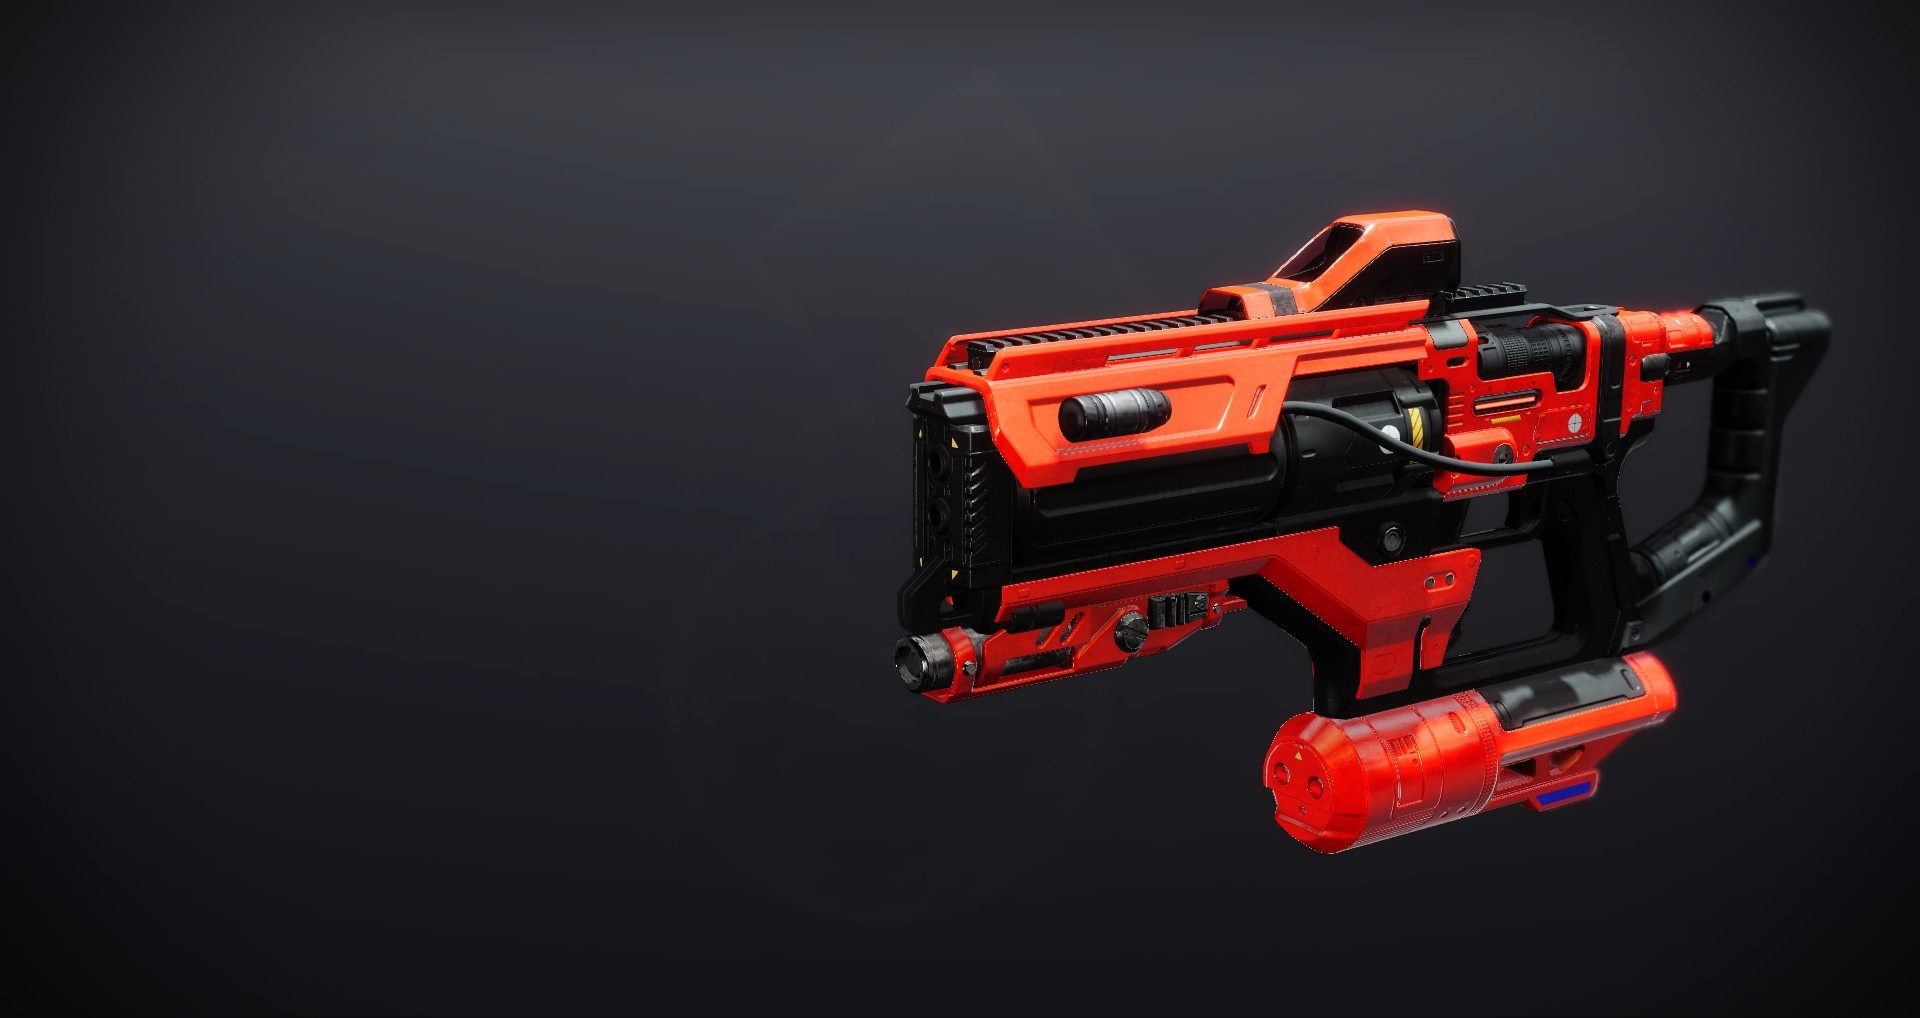 the Riptide fusion rifle in Destiny 2, with its standard red shader.